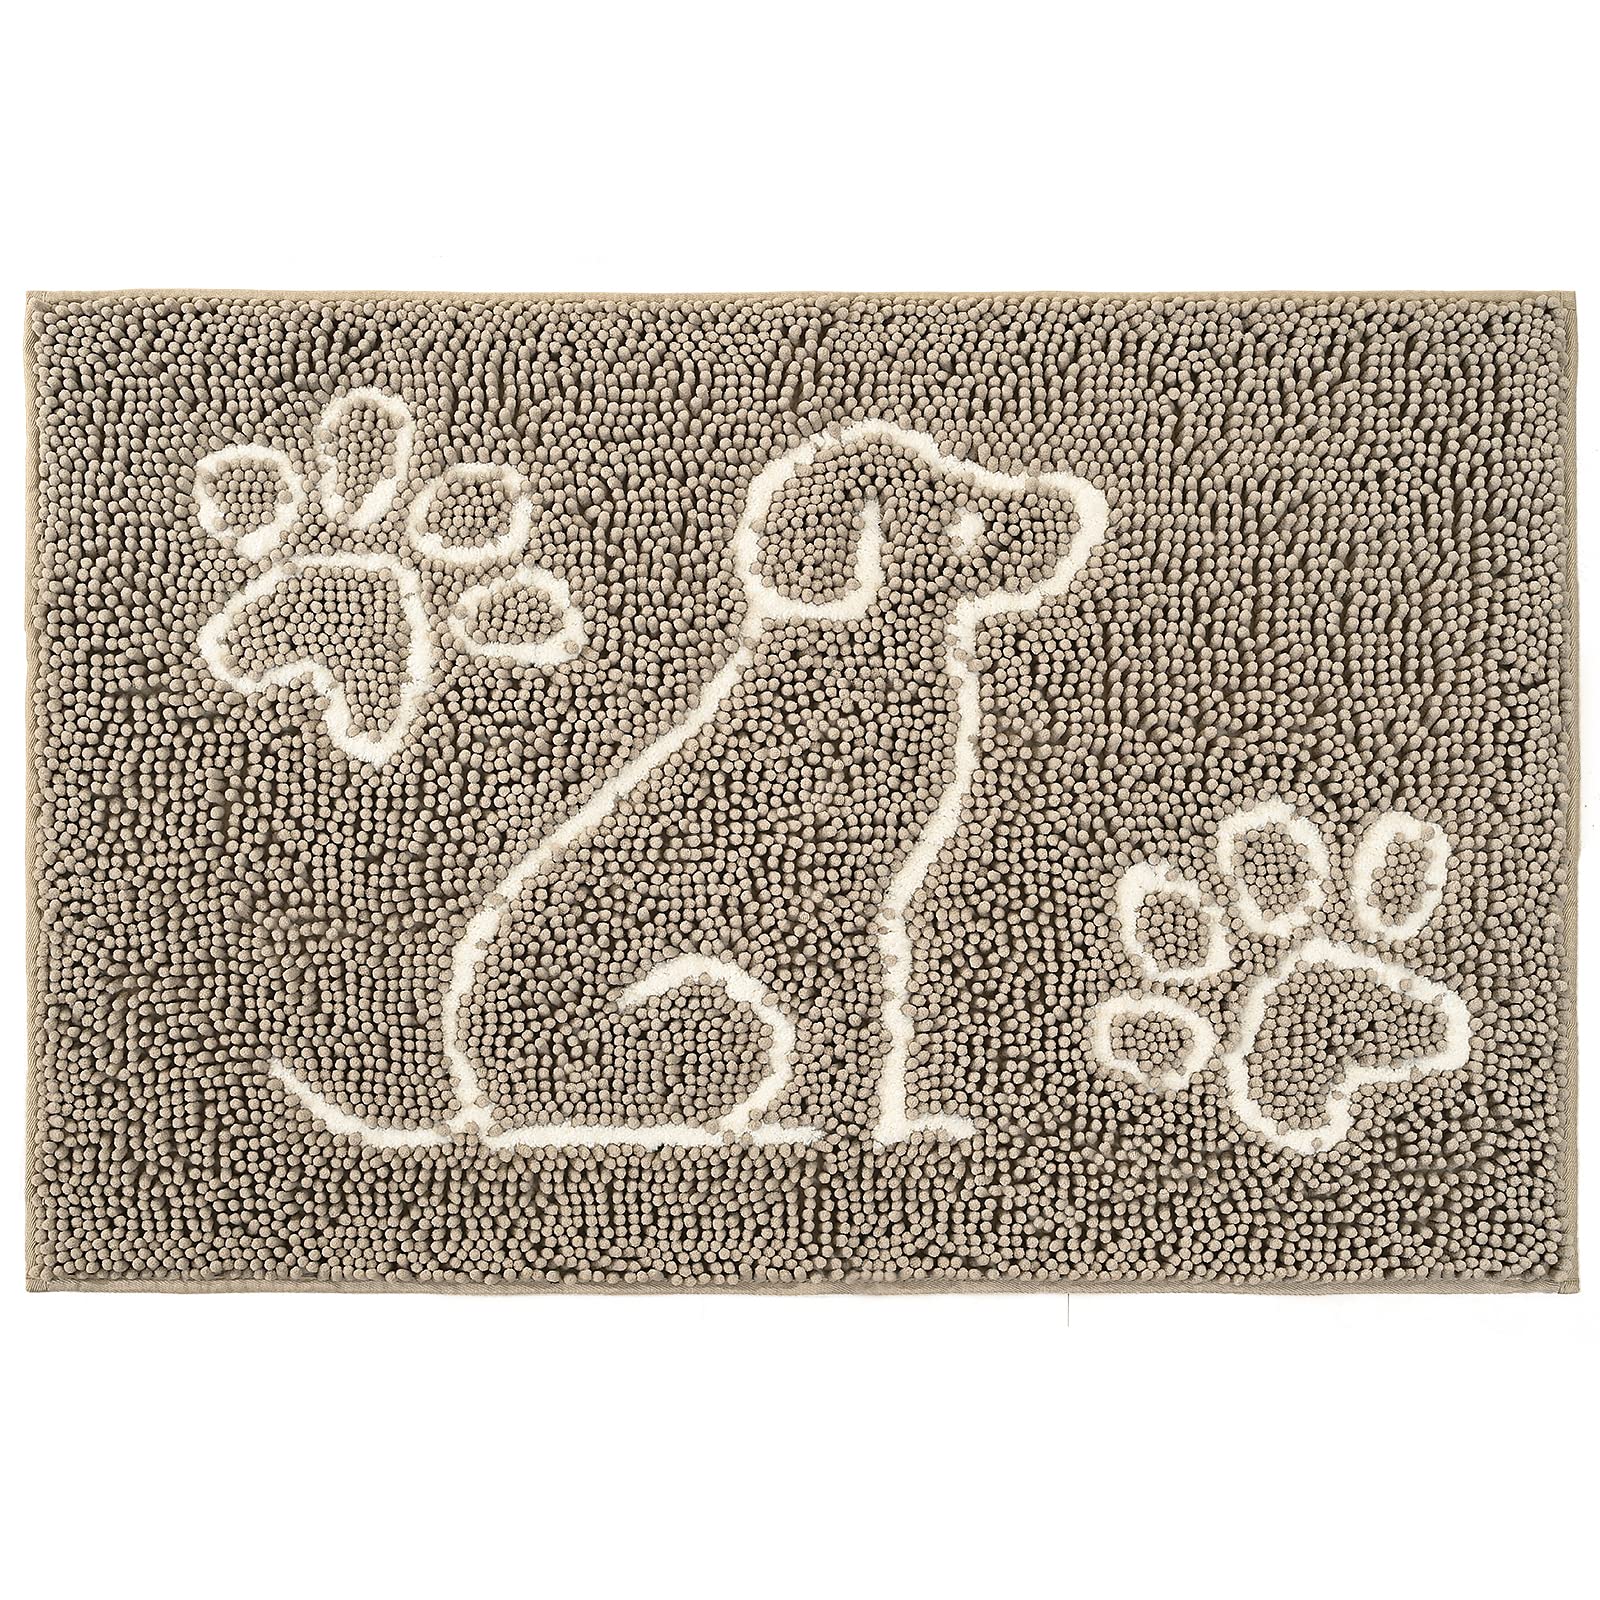 Ompaa Indoor Muddy Door Mats for Dirty Dogs Paws and Mud